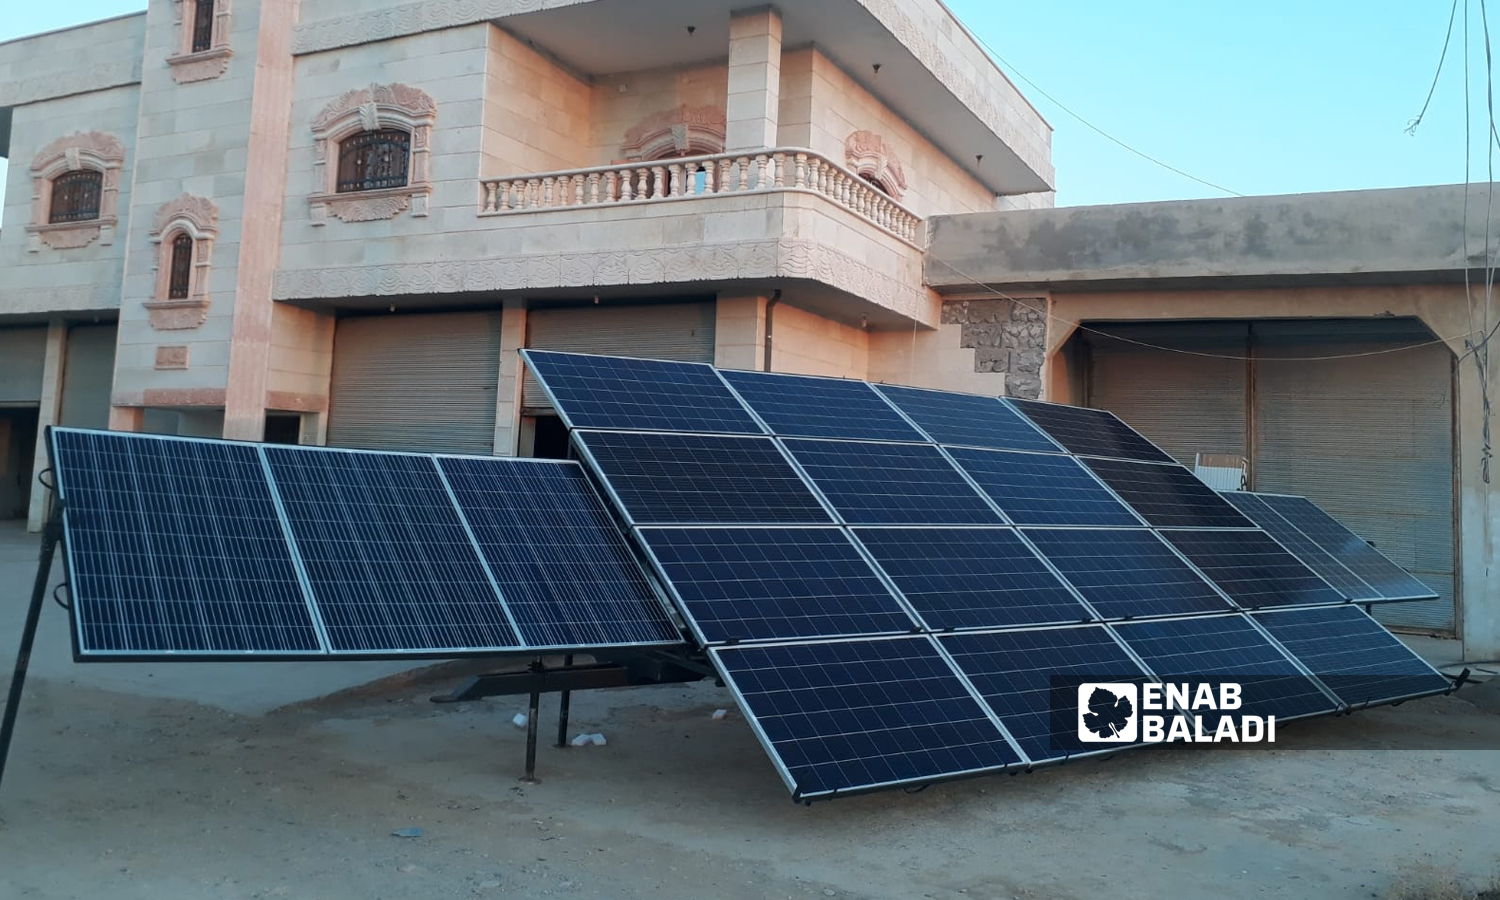 Solar panels in a house in the town of Qabasin in the eastern countryside of Aleppo - 9 June 2022 (Enab Baladi / Siraj Mohammad)